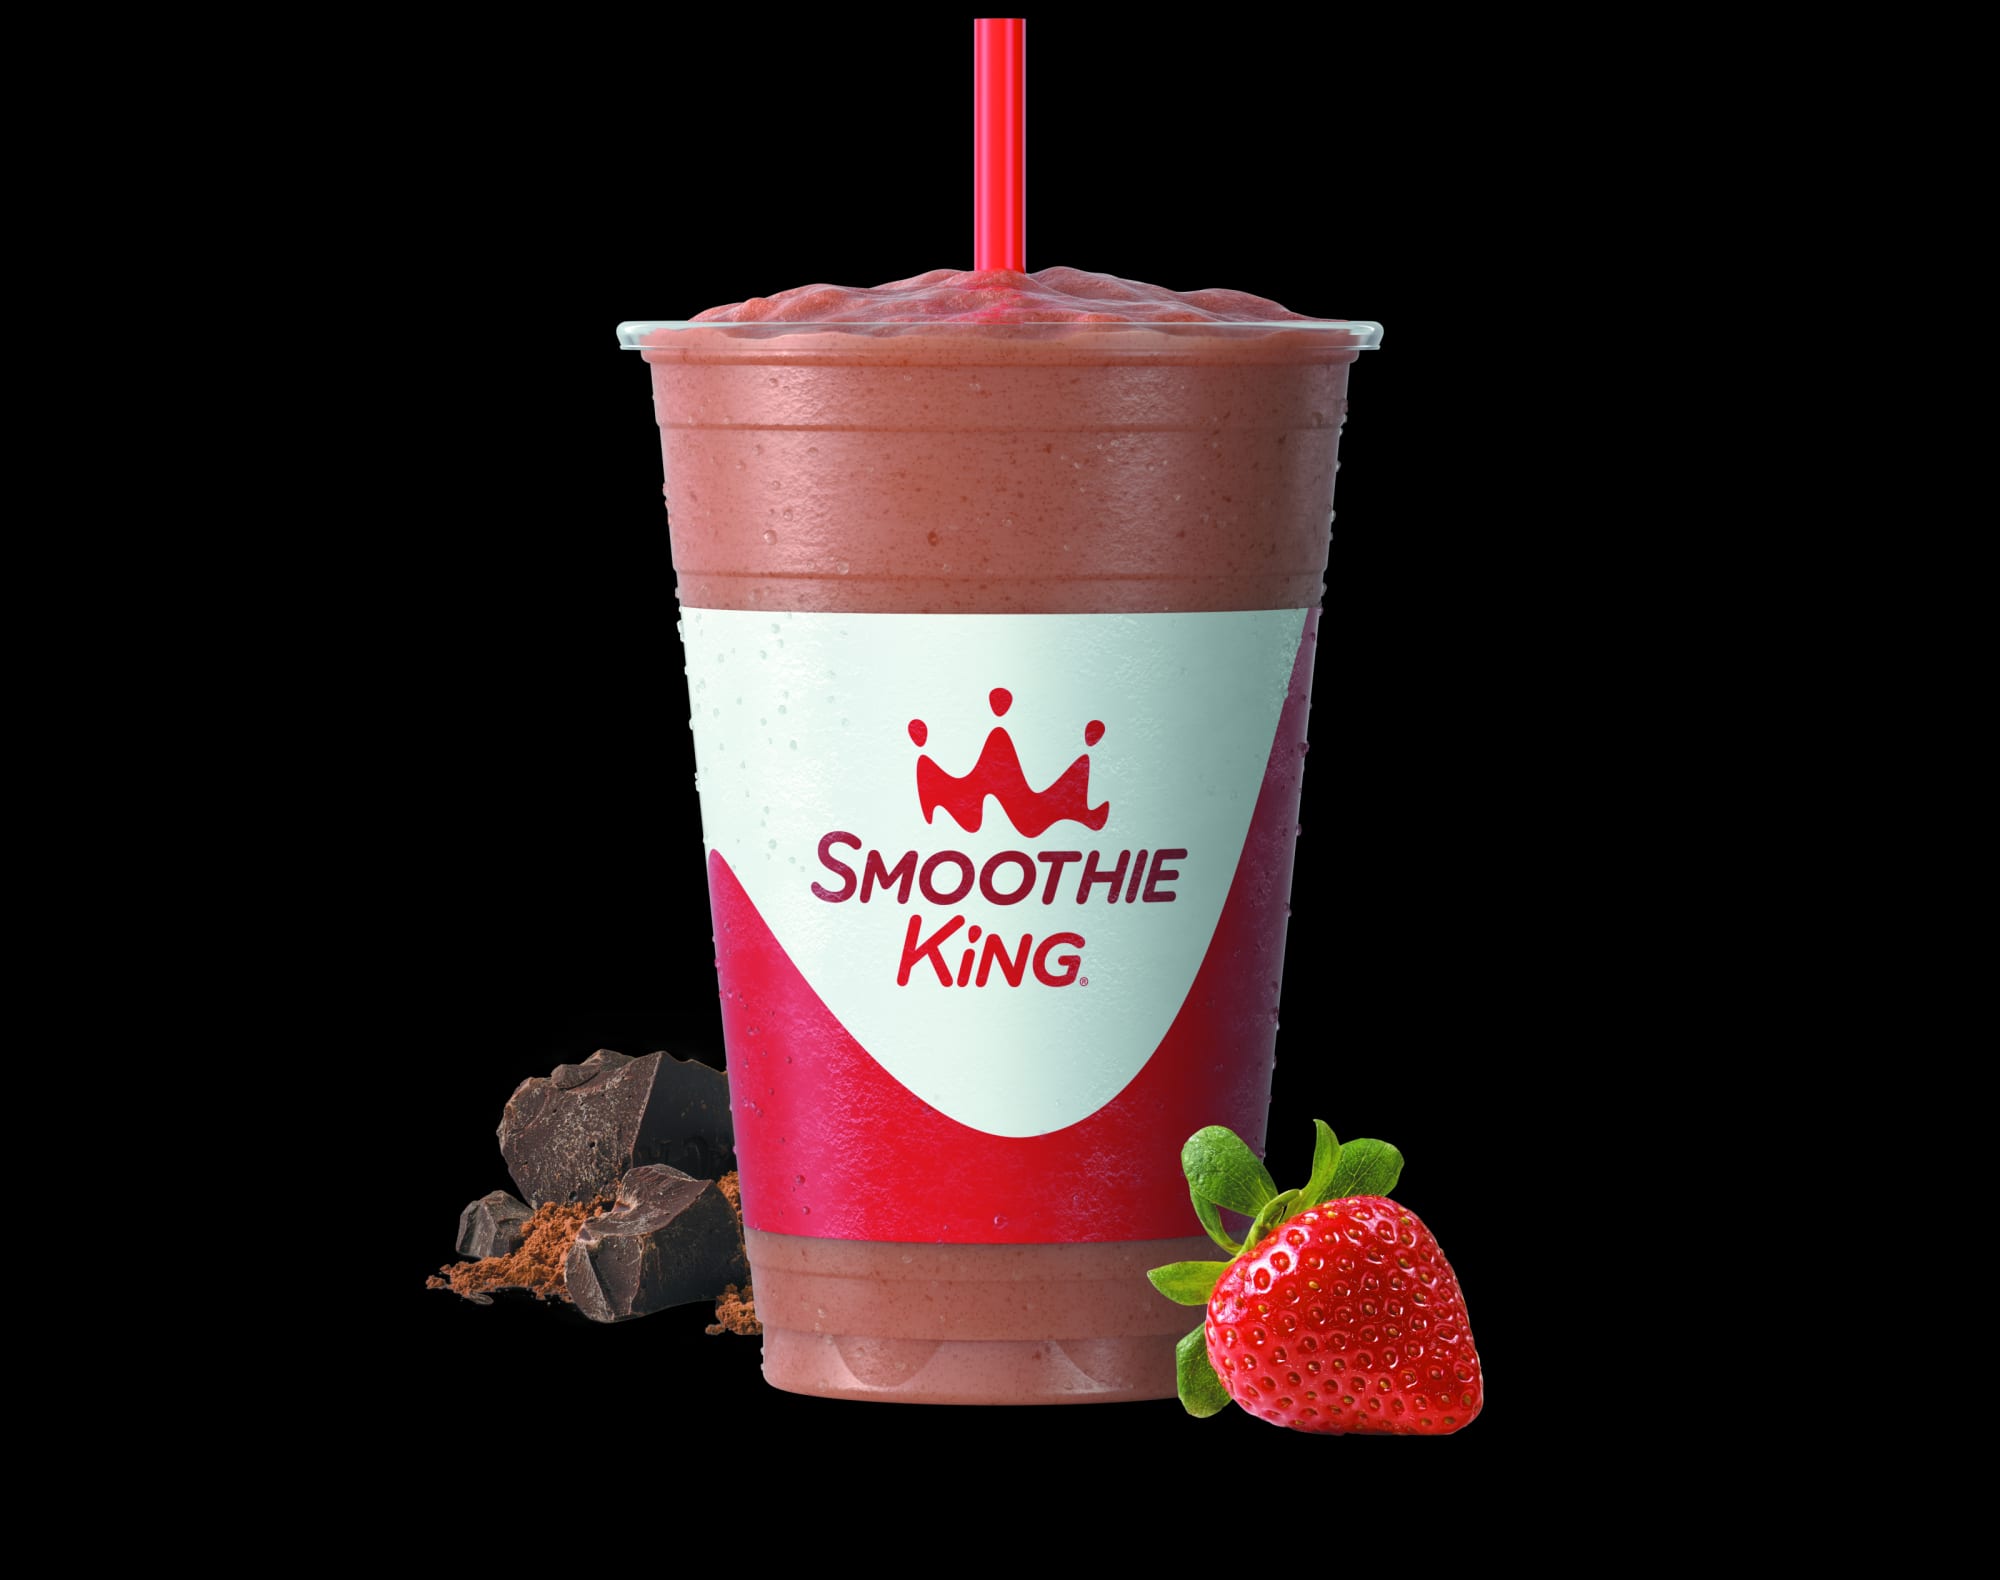 Smoothie King is offering their own Veterans Day deal